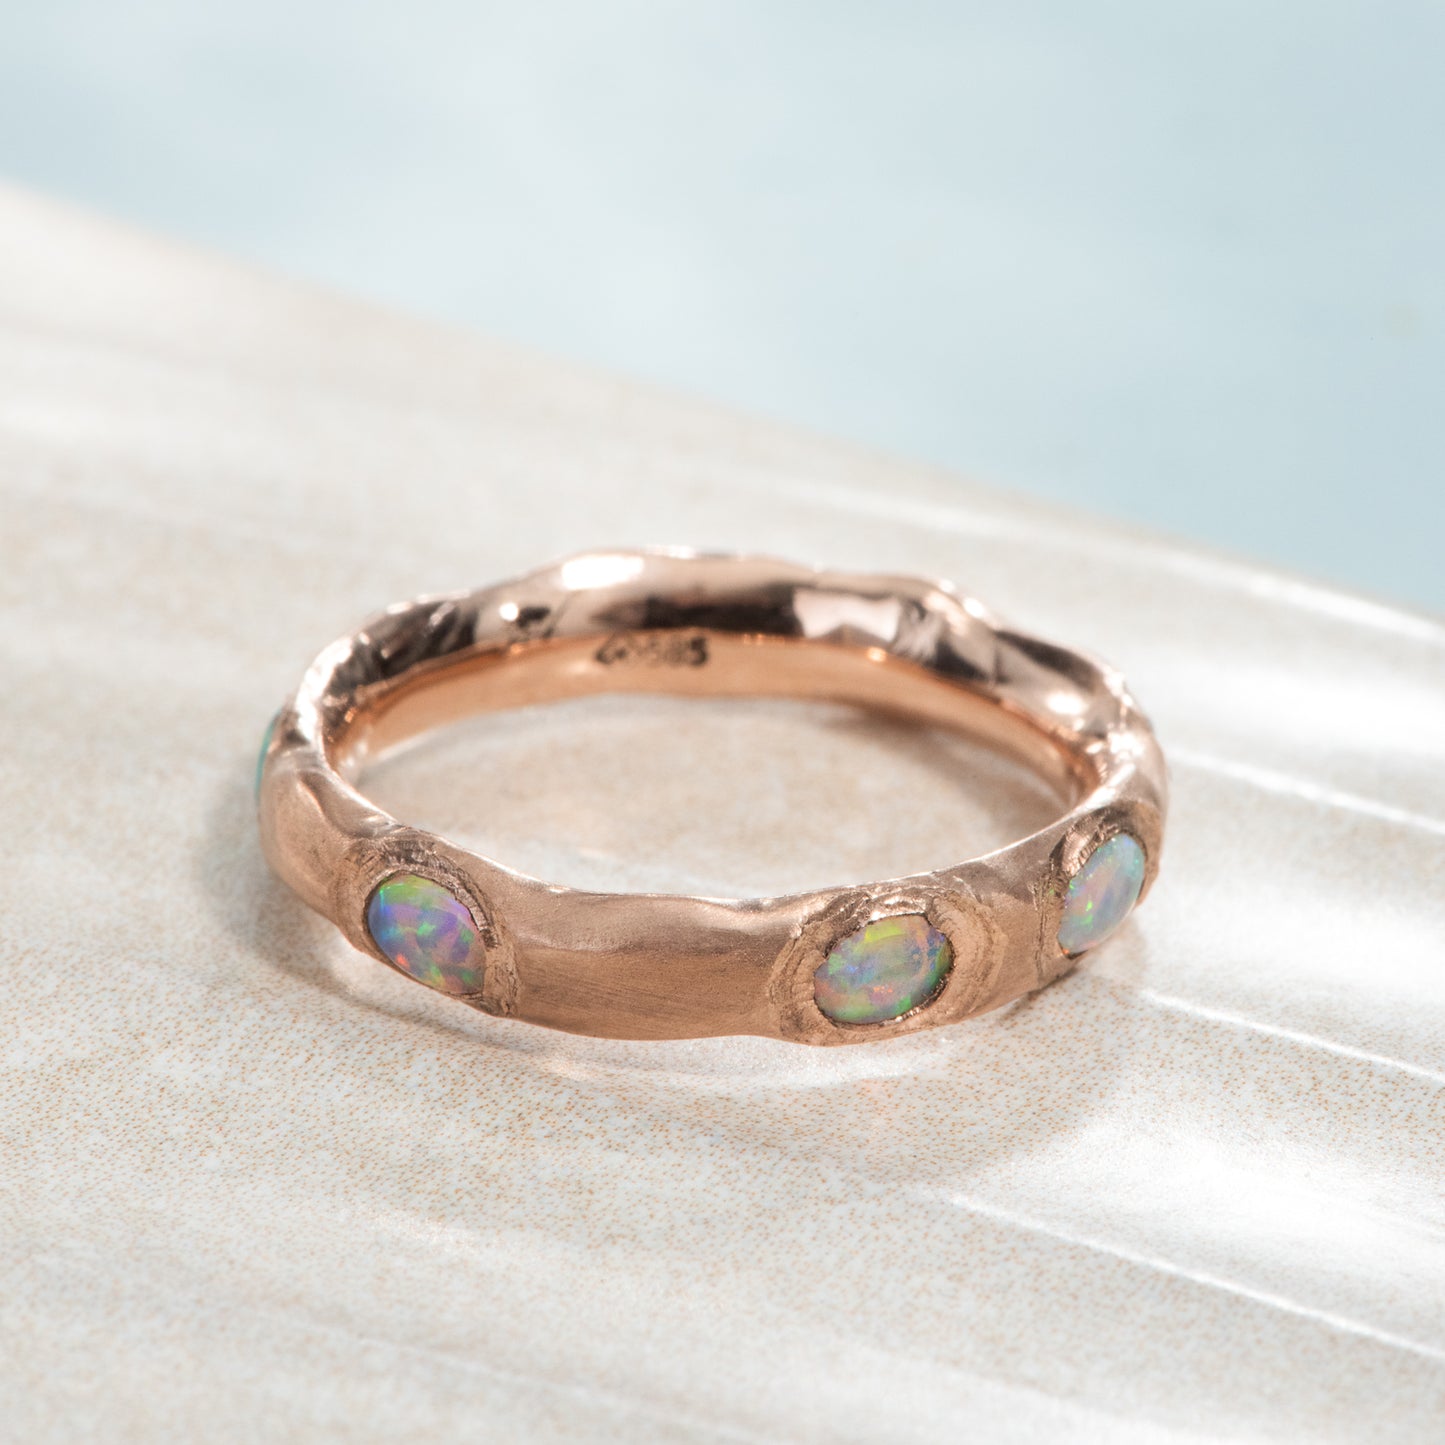 5 oval opals organically flush set all the way around a satin finished rose gold ring.